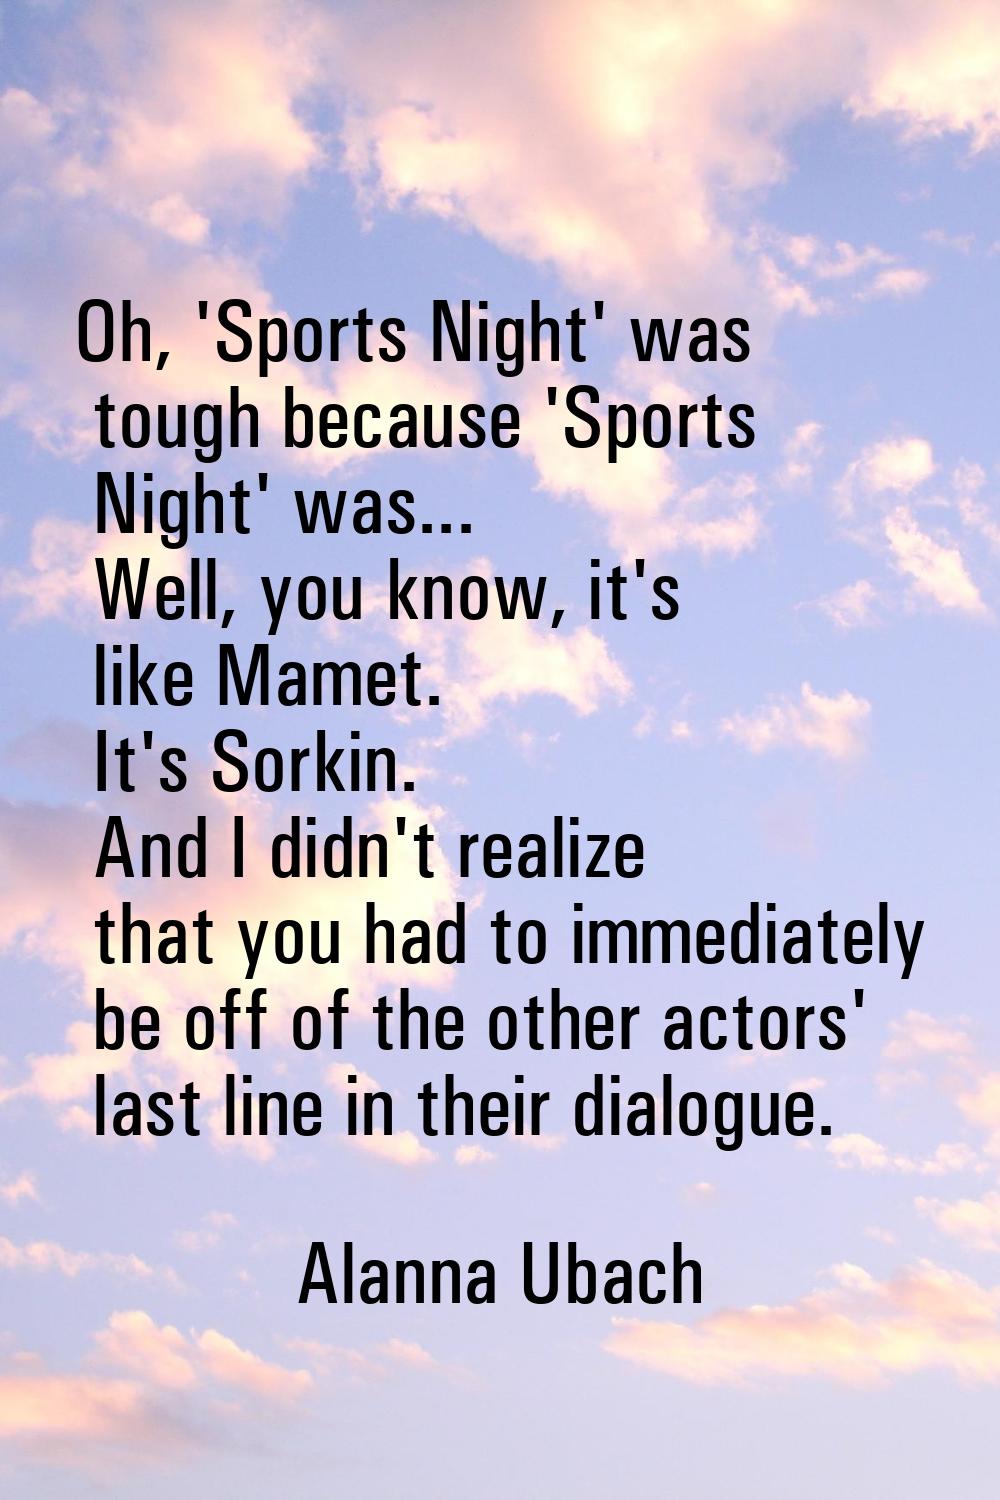 Oh, 'Sports Night' was tough because 'Sports Night' was... Well, you know, it's like Mamet. It's So